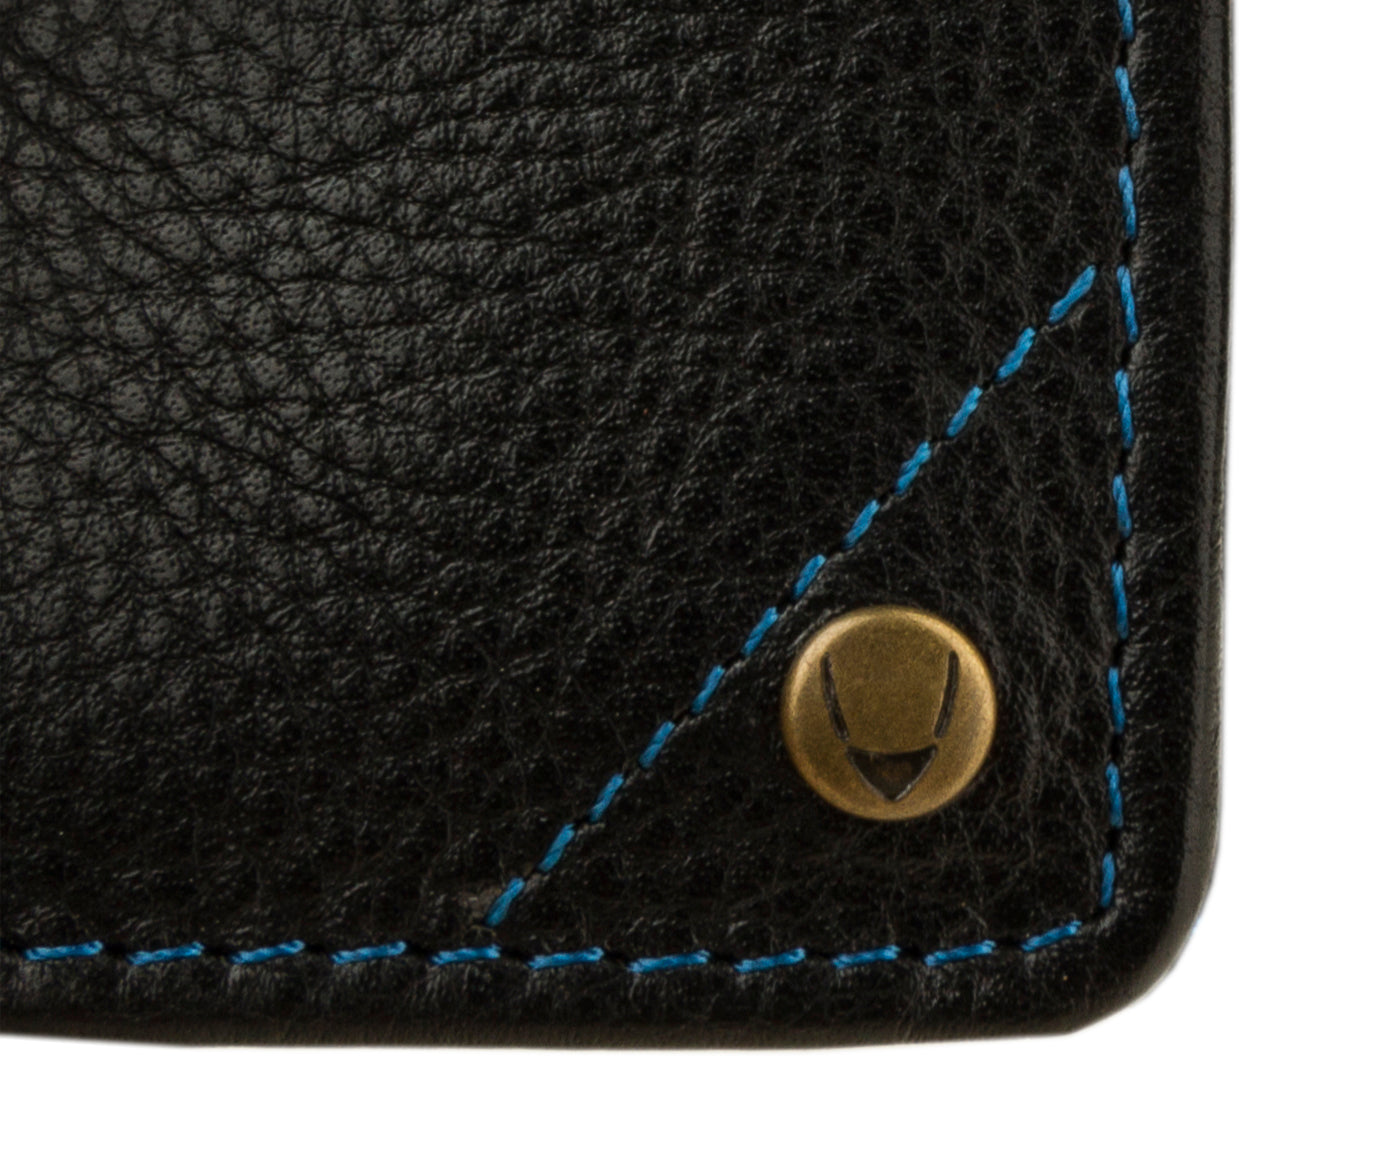 Hidesign Angle Stitch Leather Slim Trifold Wallet